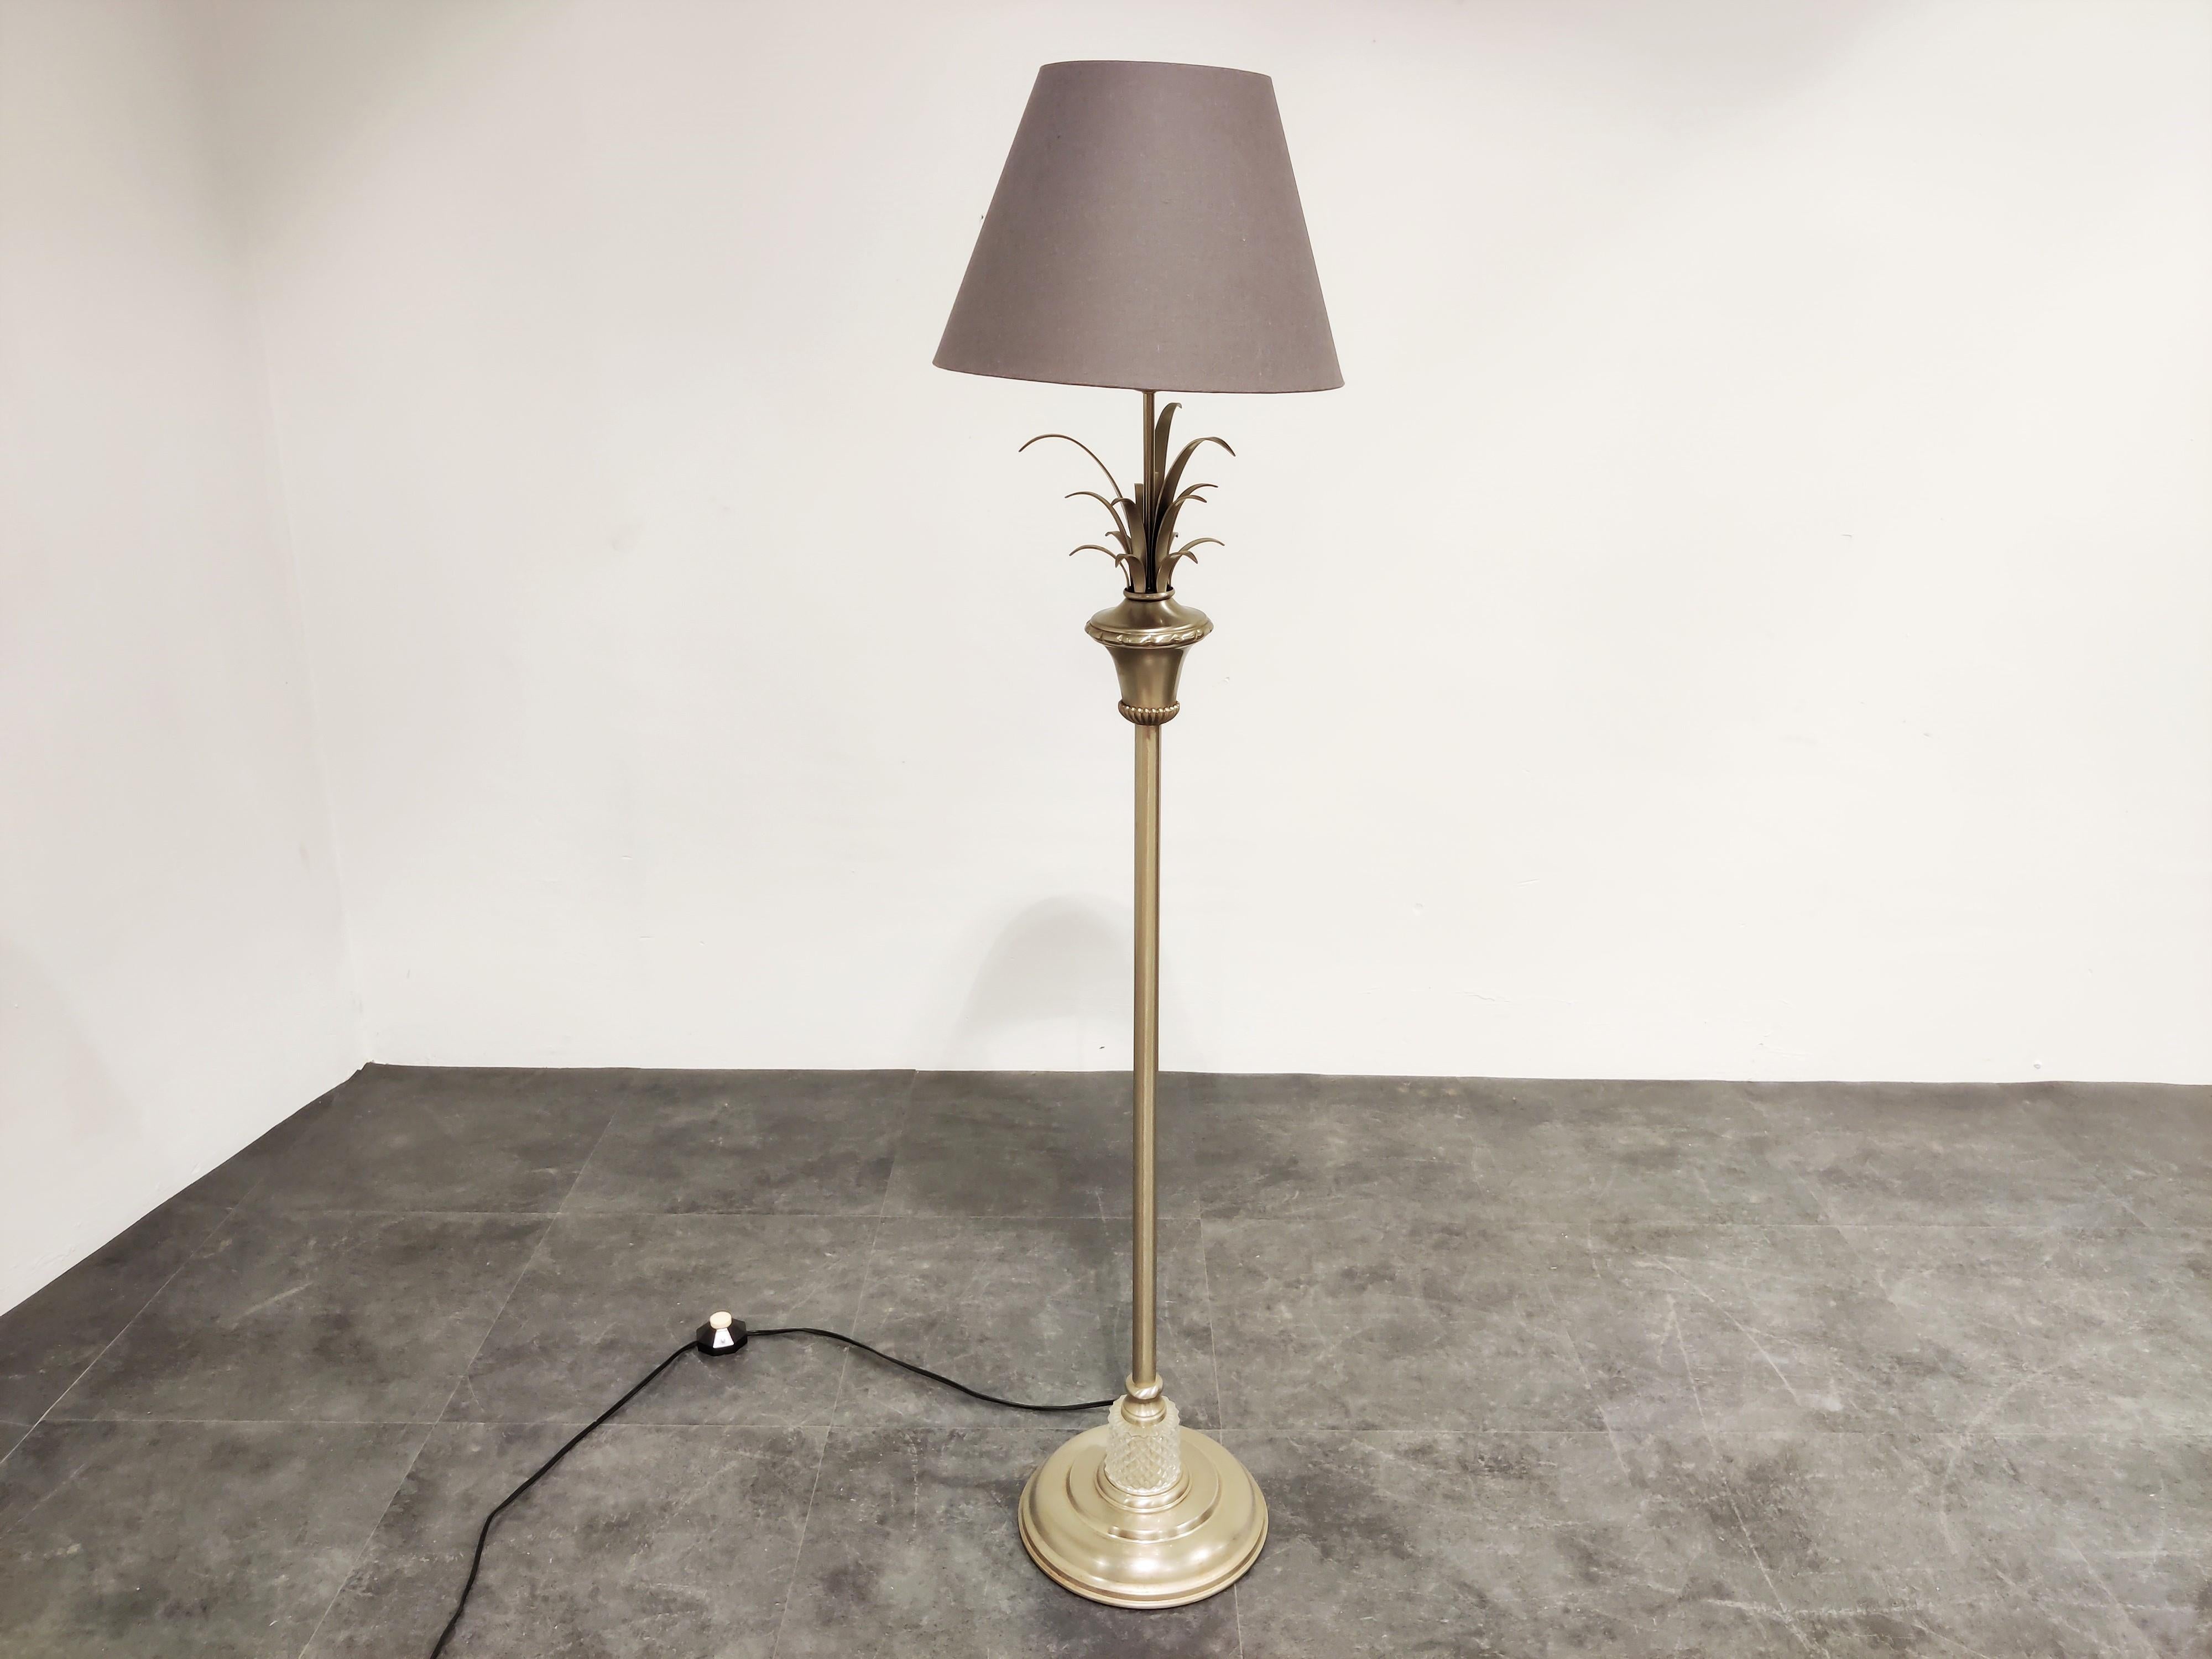 Vintage metal pineapple leaf floor lamp by Boulanger.

Charming natural lamp just like the pineapple leaf table lamps but here offered in a rare floor lamp edition.

The glass base adds to the charm.

Good condition.

Tested and ready to use